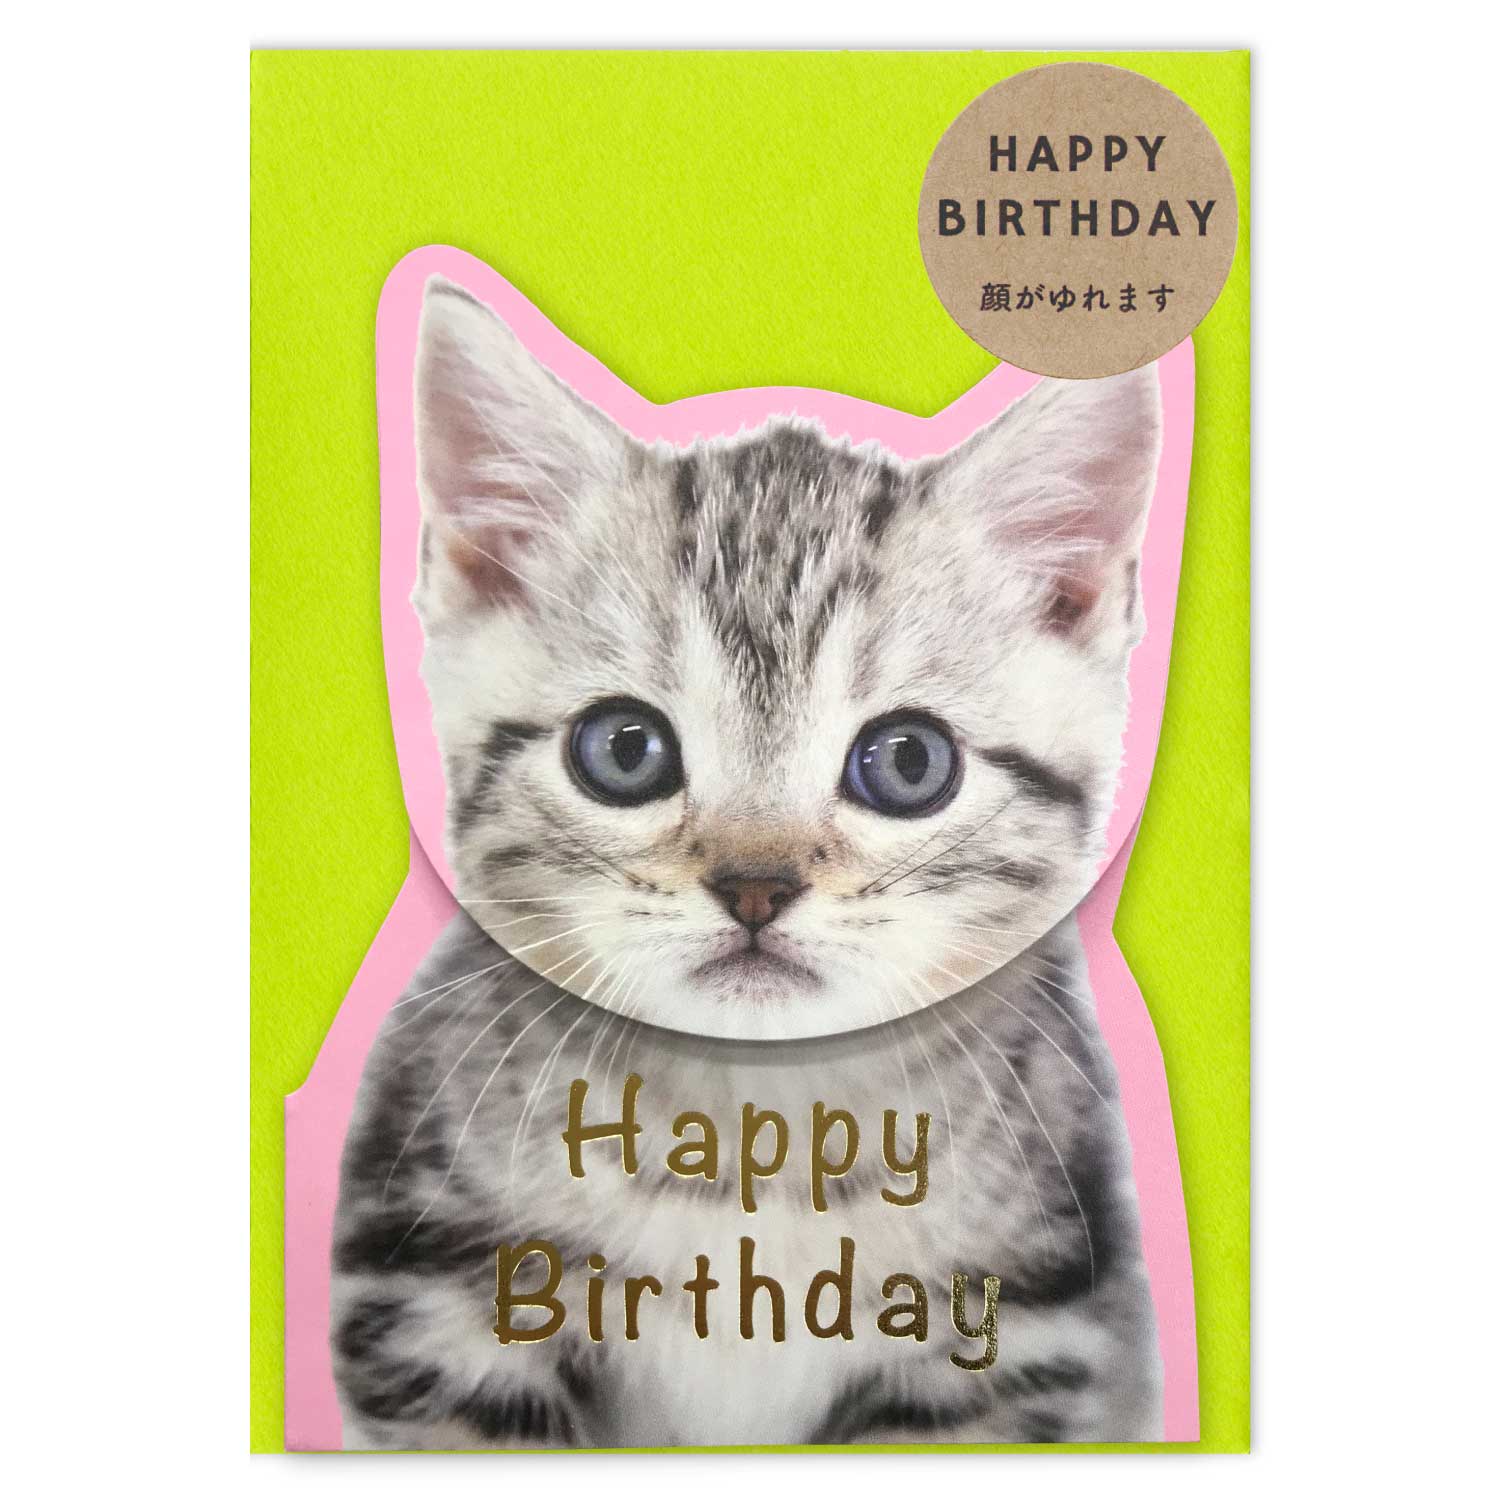 Bobble Head Cat Happy Birthday Greeting Card with a Green Colored Envelope